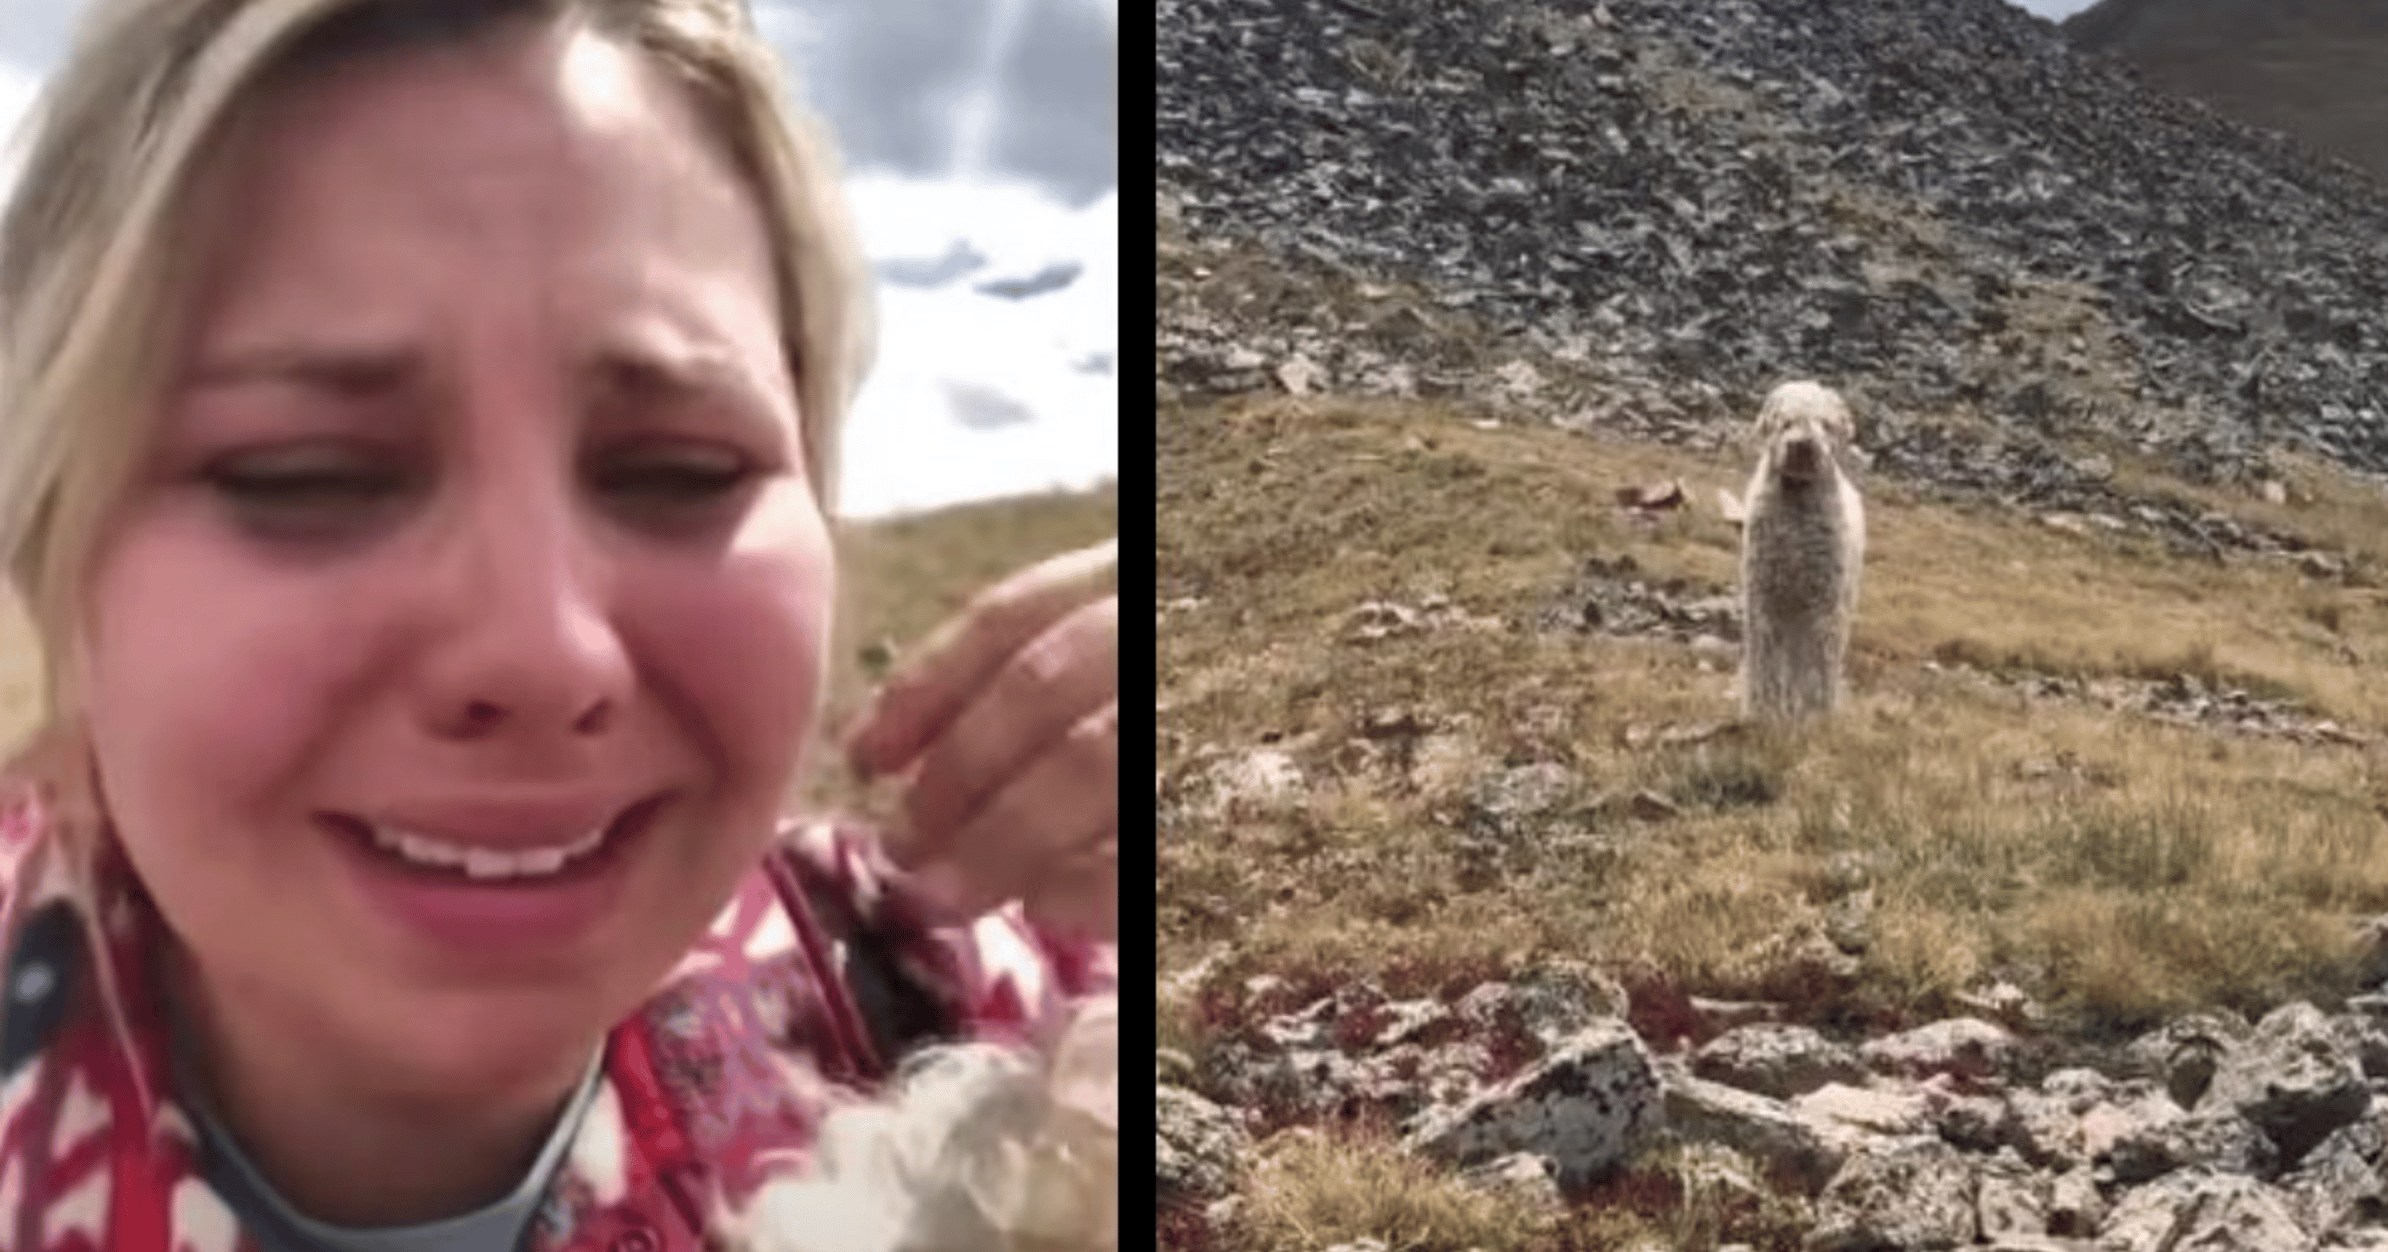 Woman Tearfully Reunites With Dog Missing For 19 Days After Crash